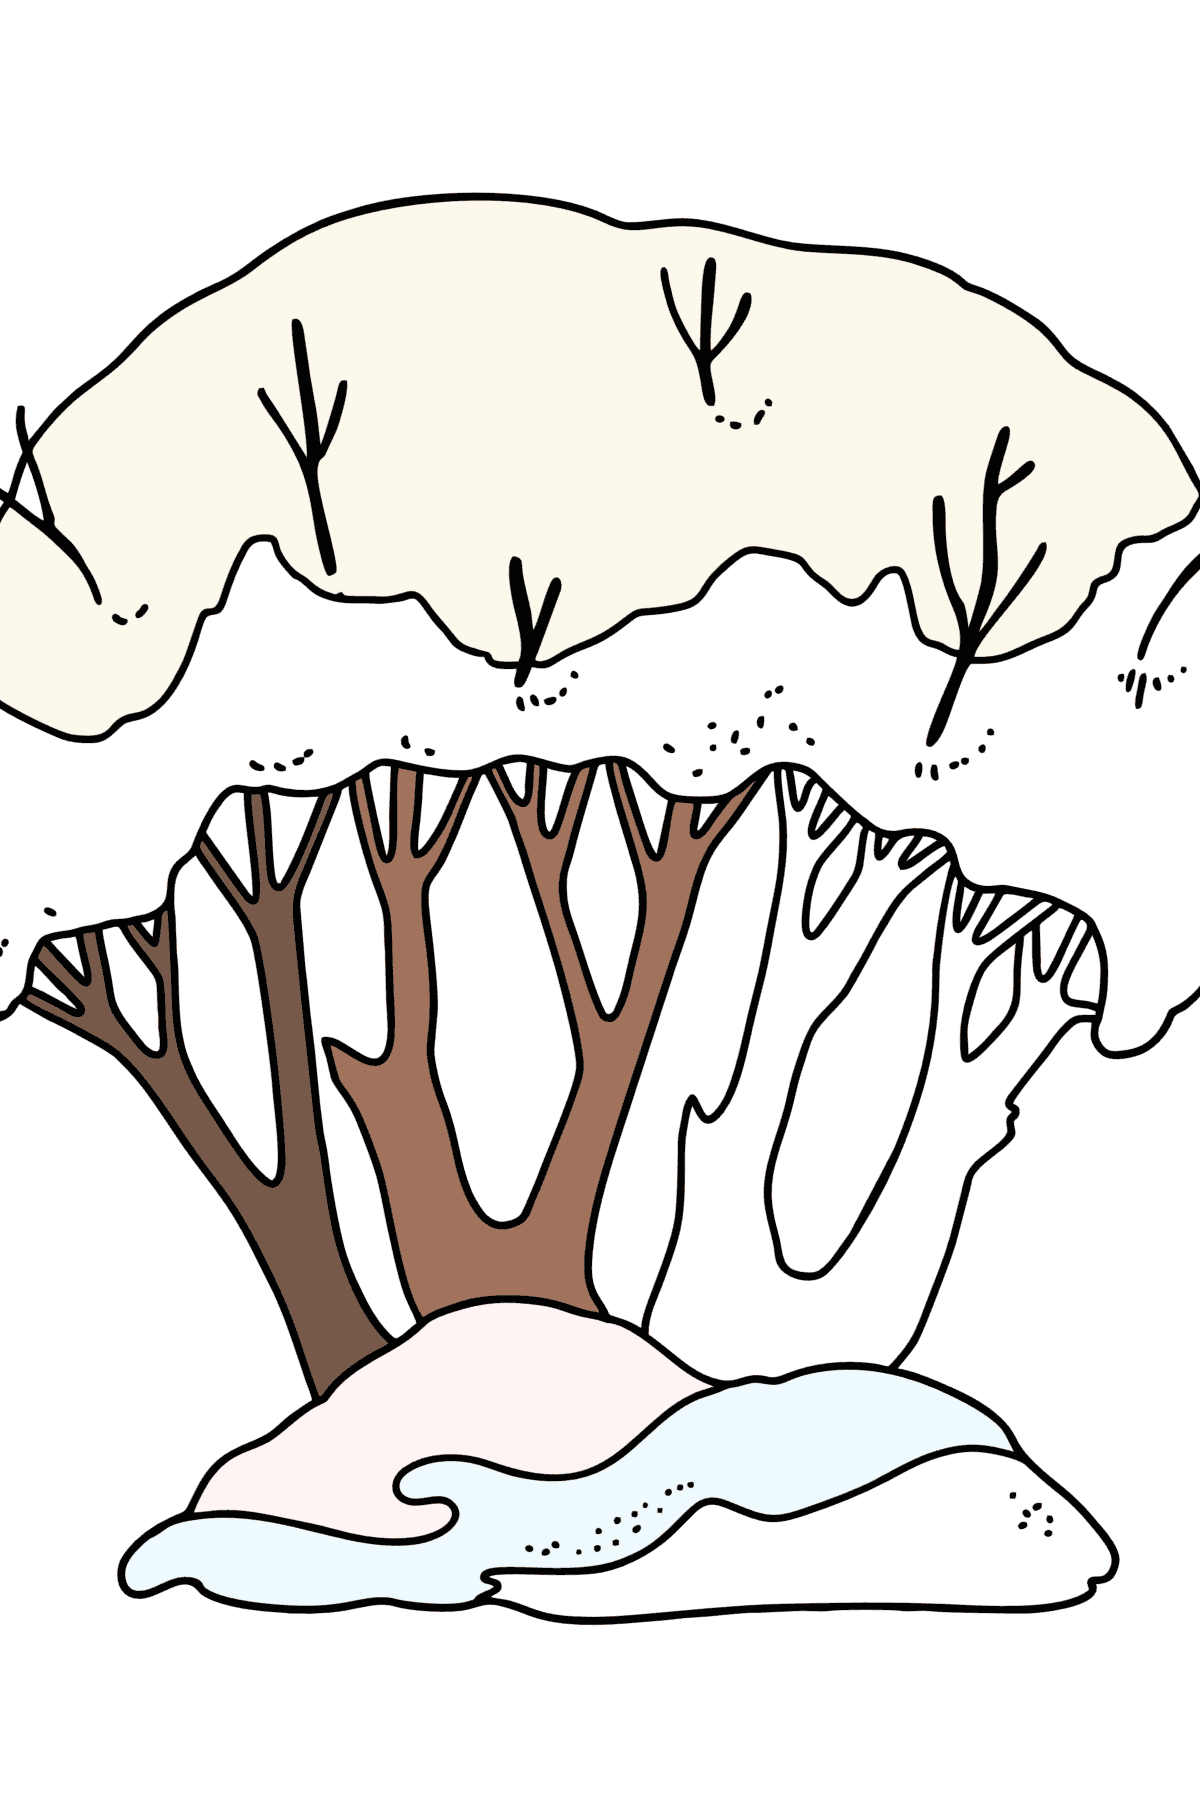 Winter Trees coloring page - Coloring Pages for Kids